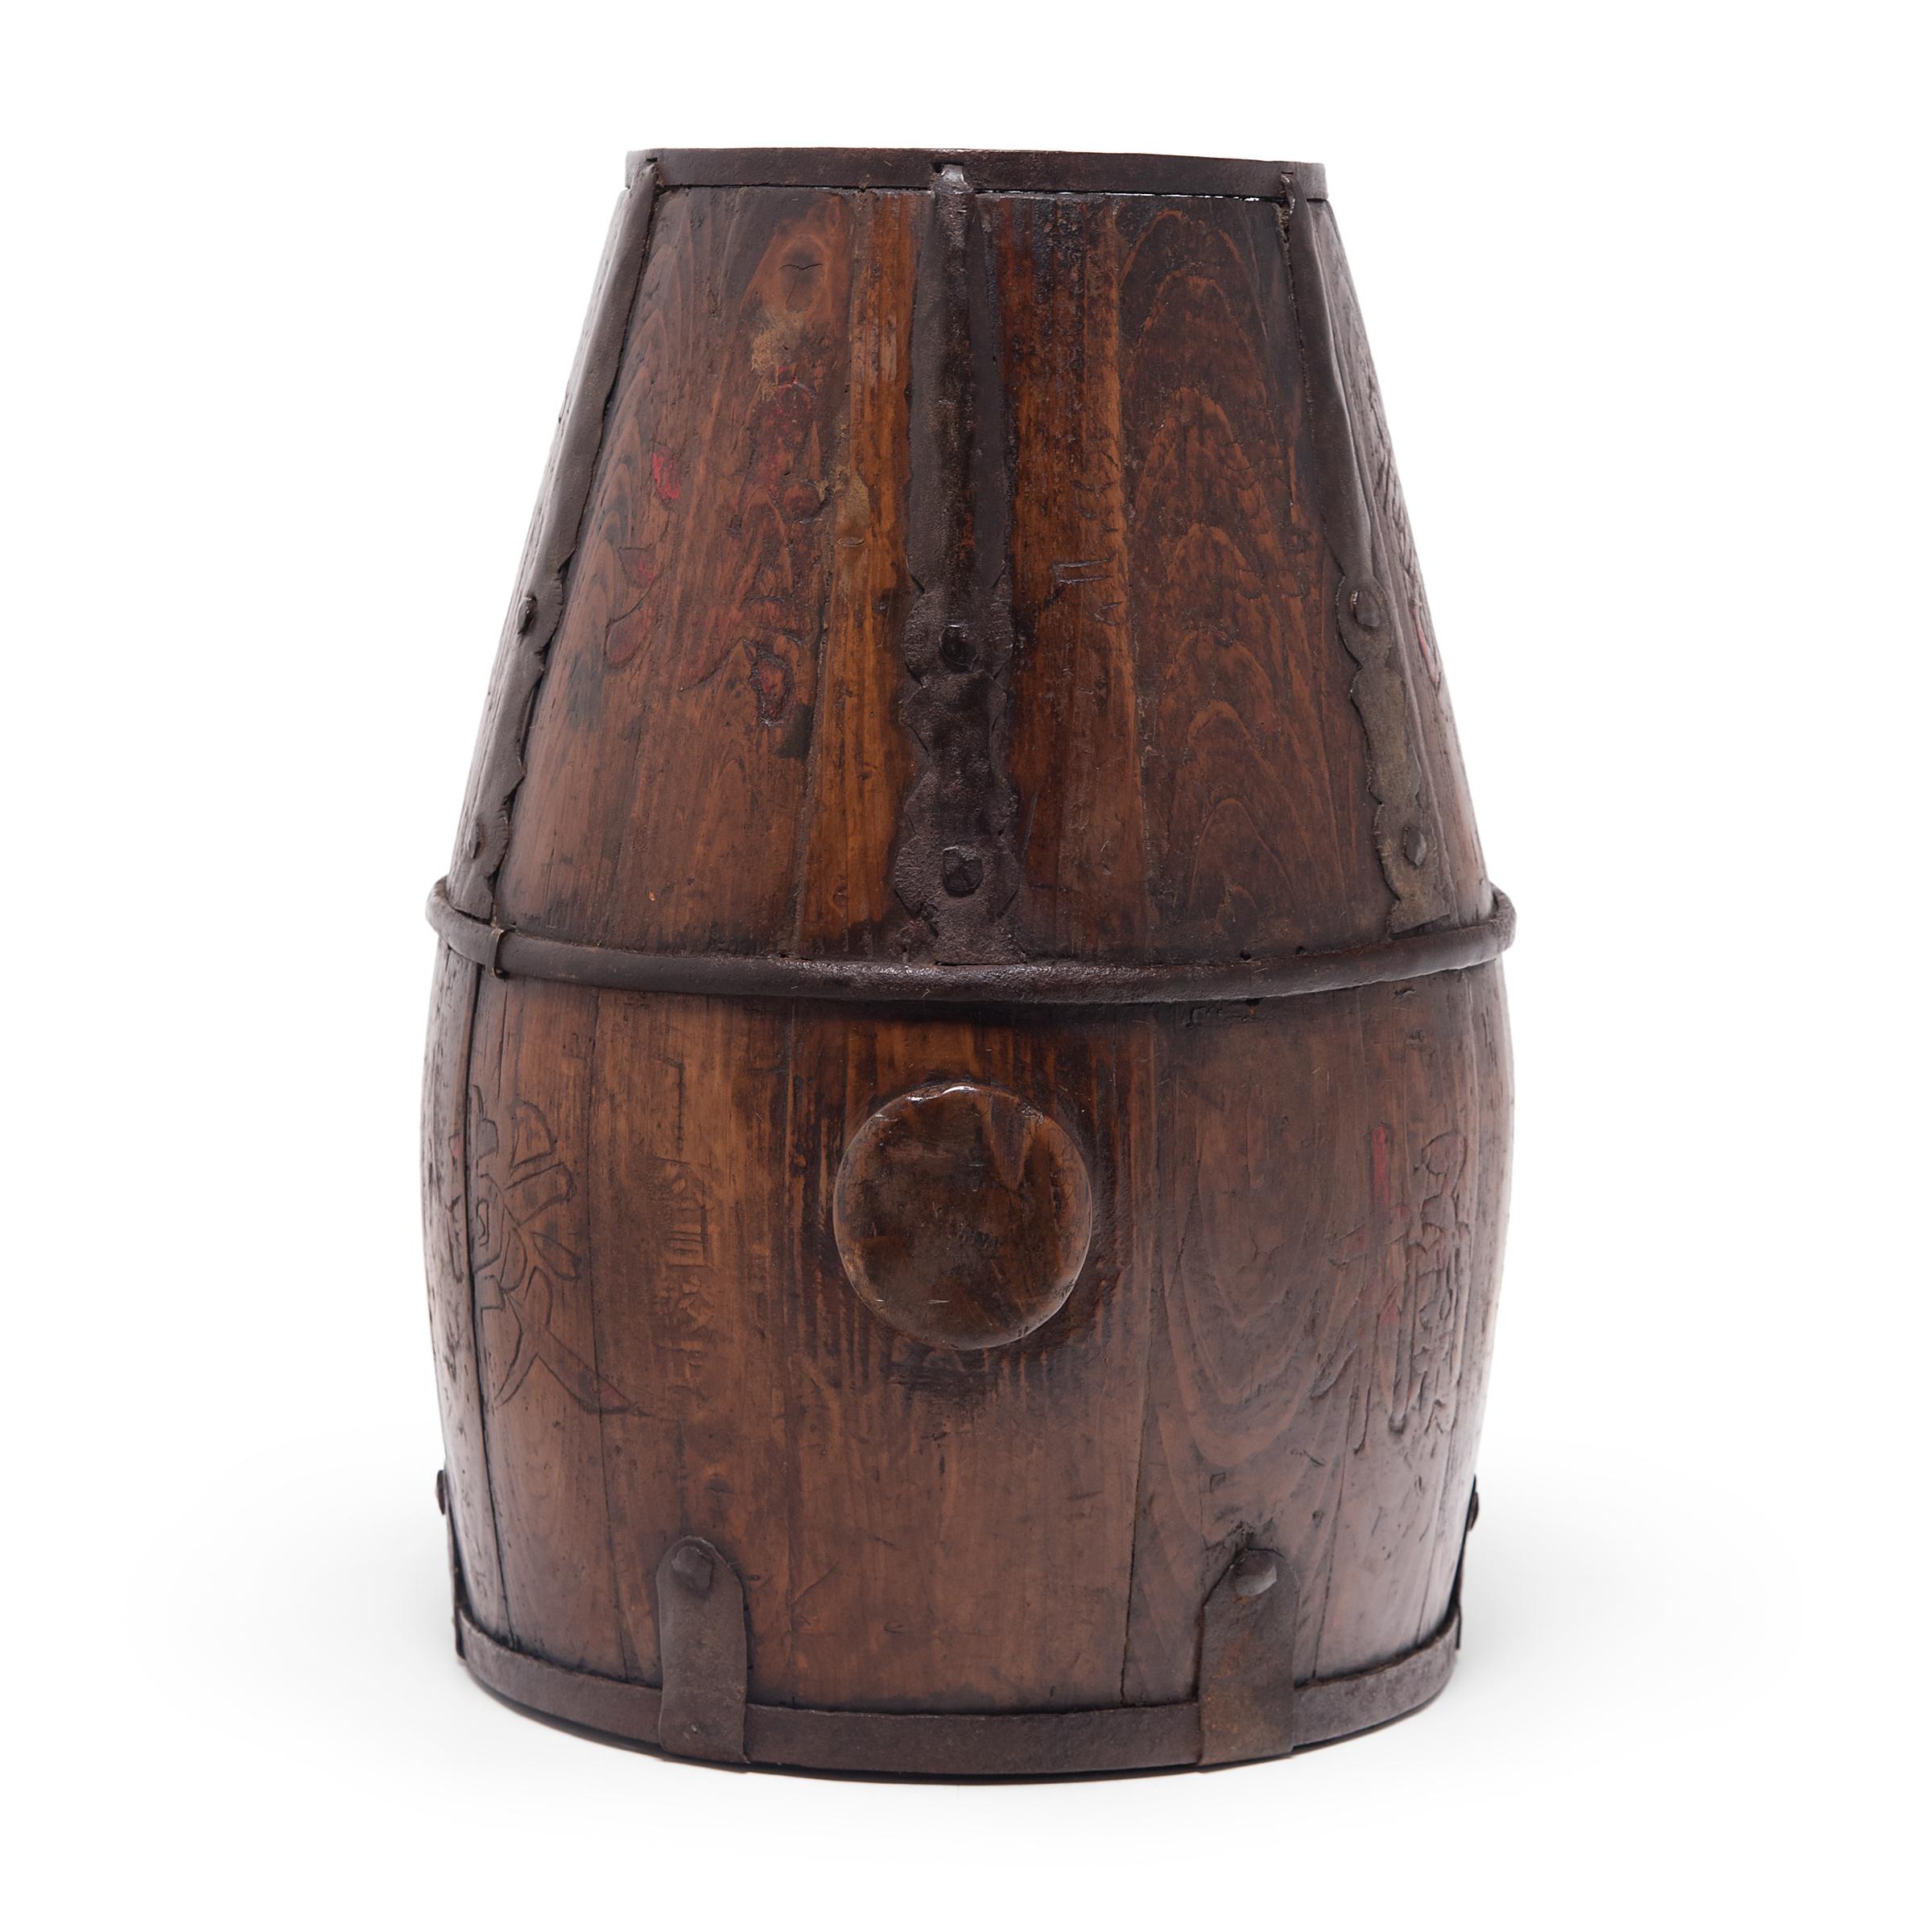 This hand-crafted wood container dates to the early 20th century and was used to store rice and other grains. Darkened by a rich patina, the bucket is elegantly constructed of pinewood staves bound with iron rings and decorative iron fittings. The